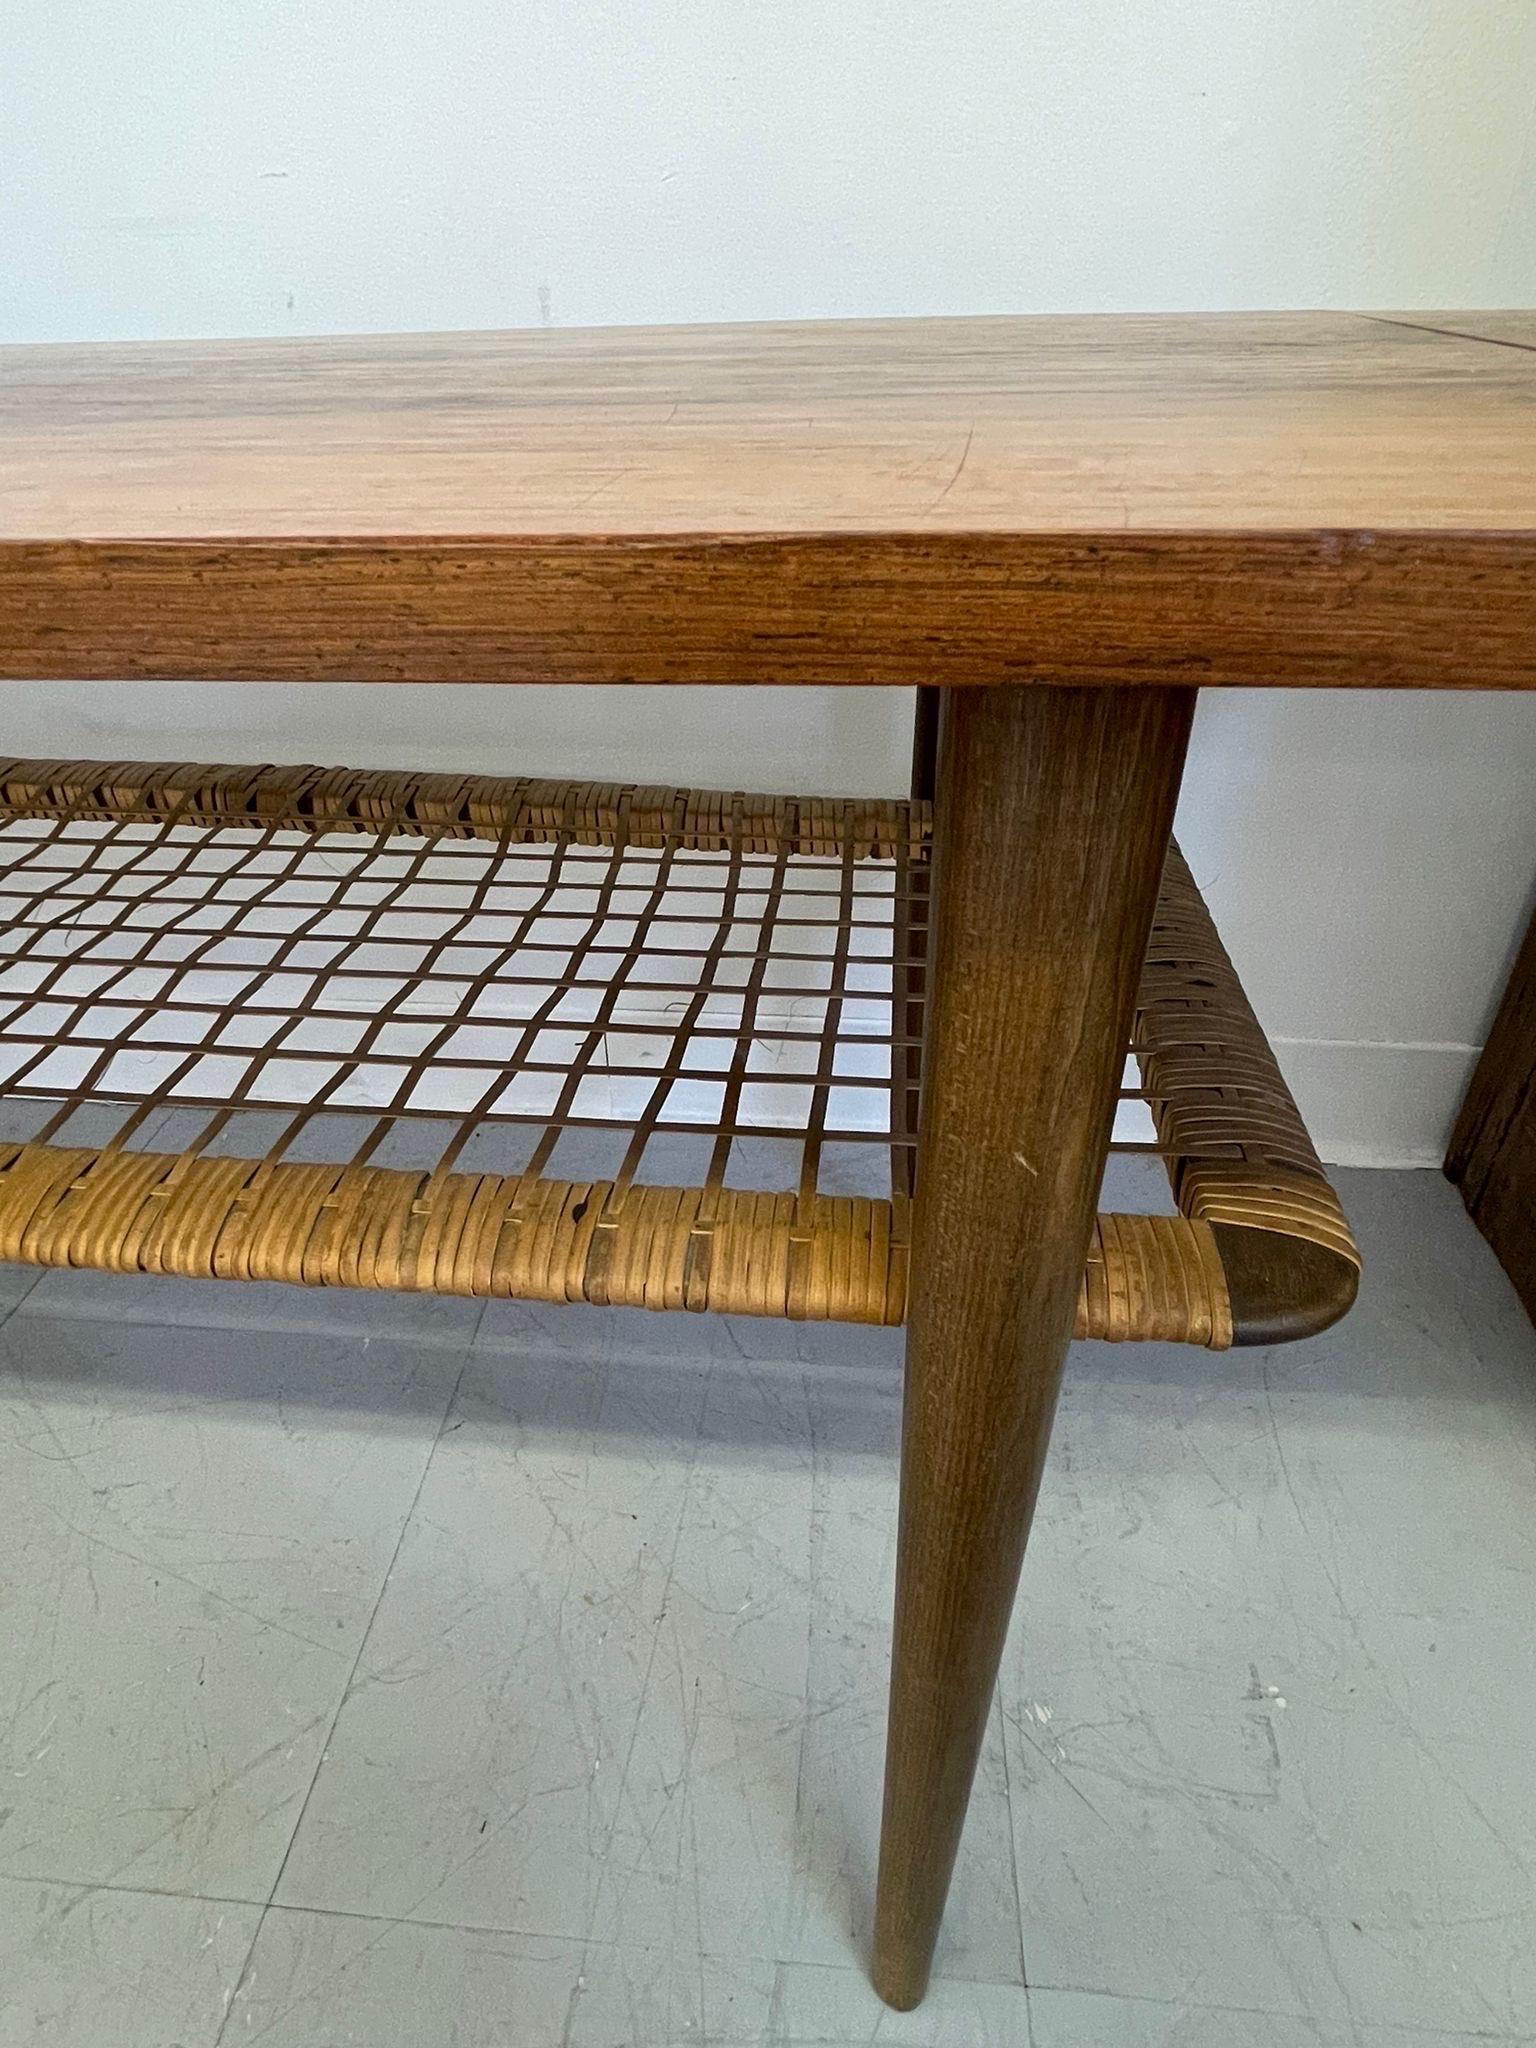 Late 20th Century Vintage Danish Modern Coffee Table With Ornate Rosewood Grain and Wicker Shelf For Sale